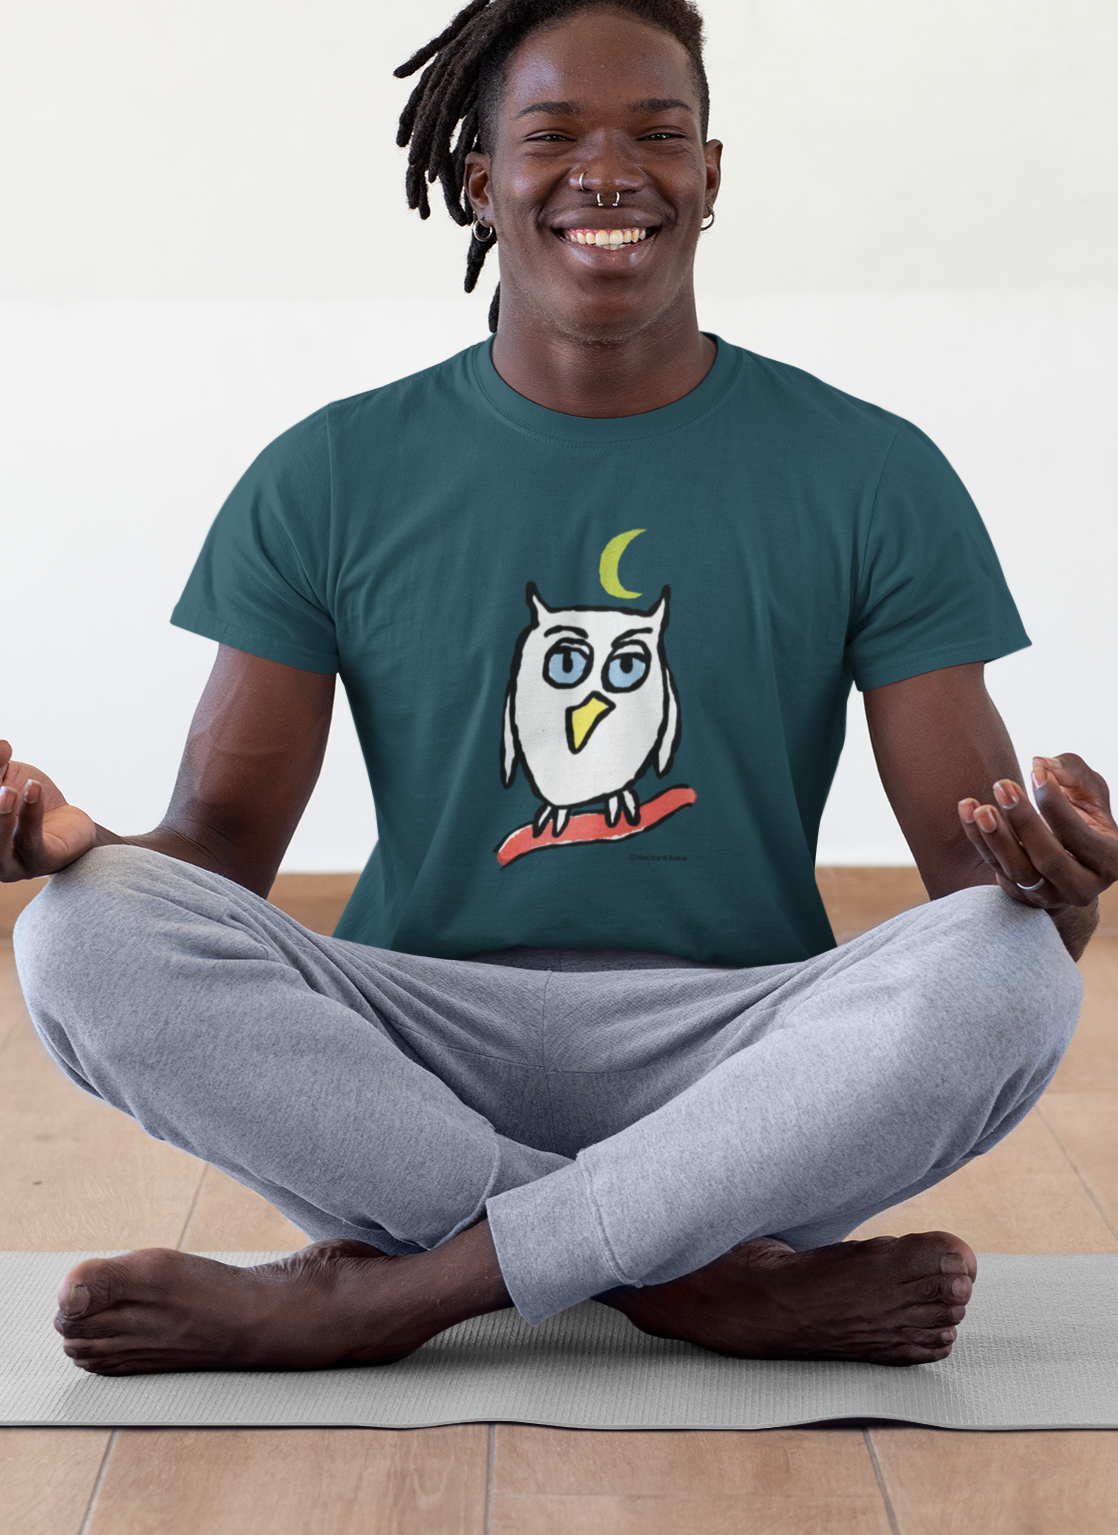 Owl T-shirts - Young man wearing a night blue colour vegan cotton Night Owl T-shirt design by Hector and Bone